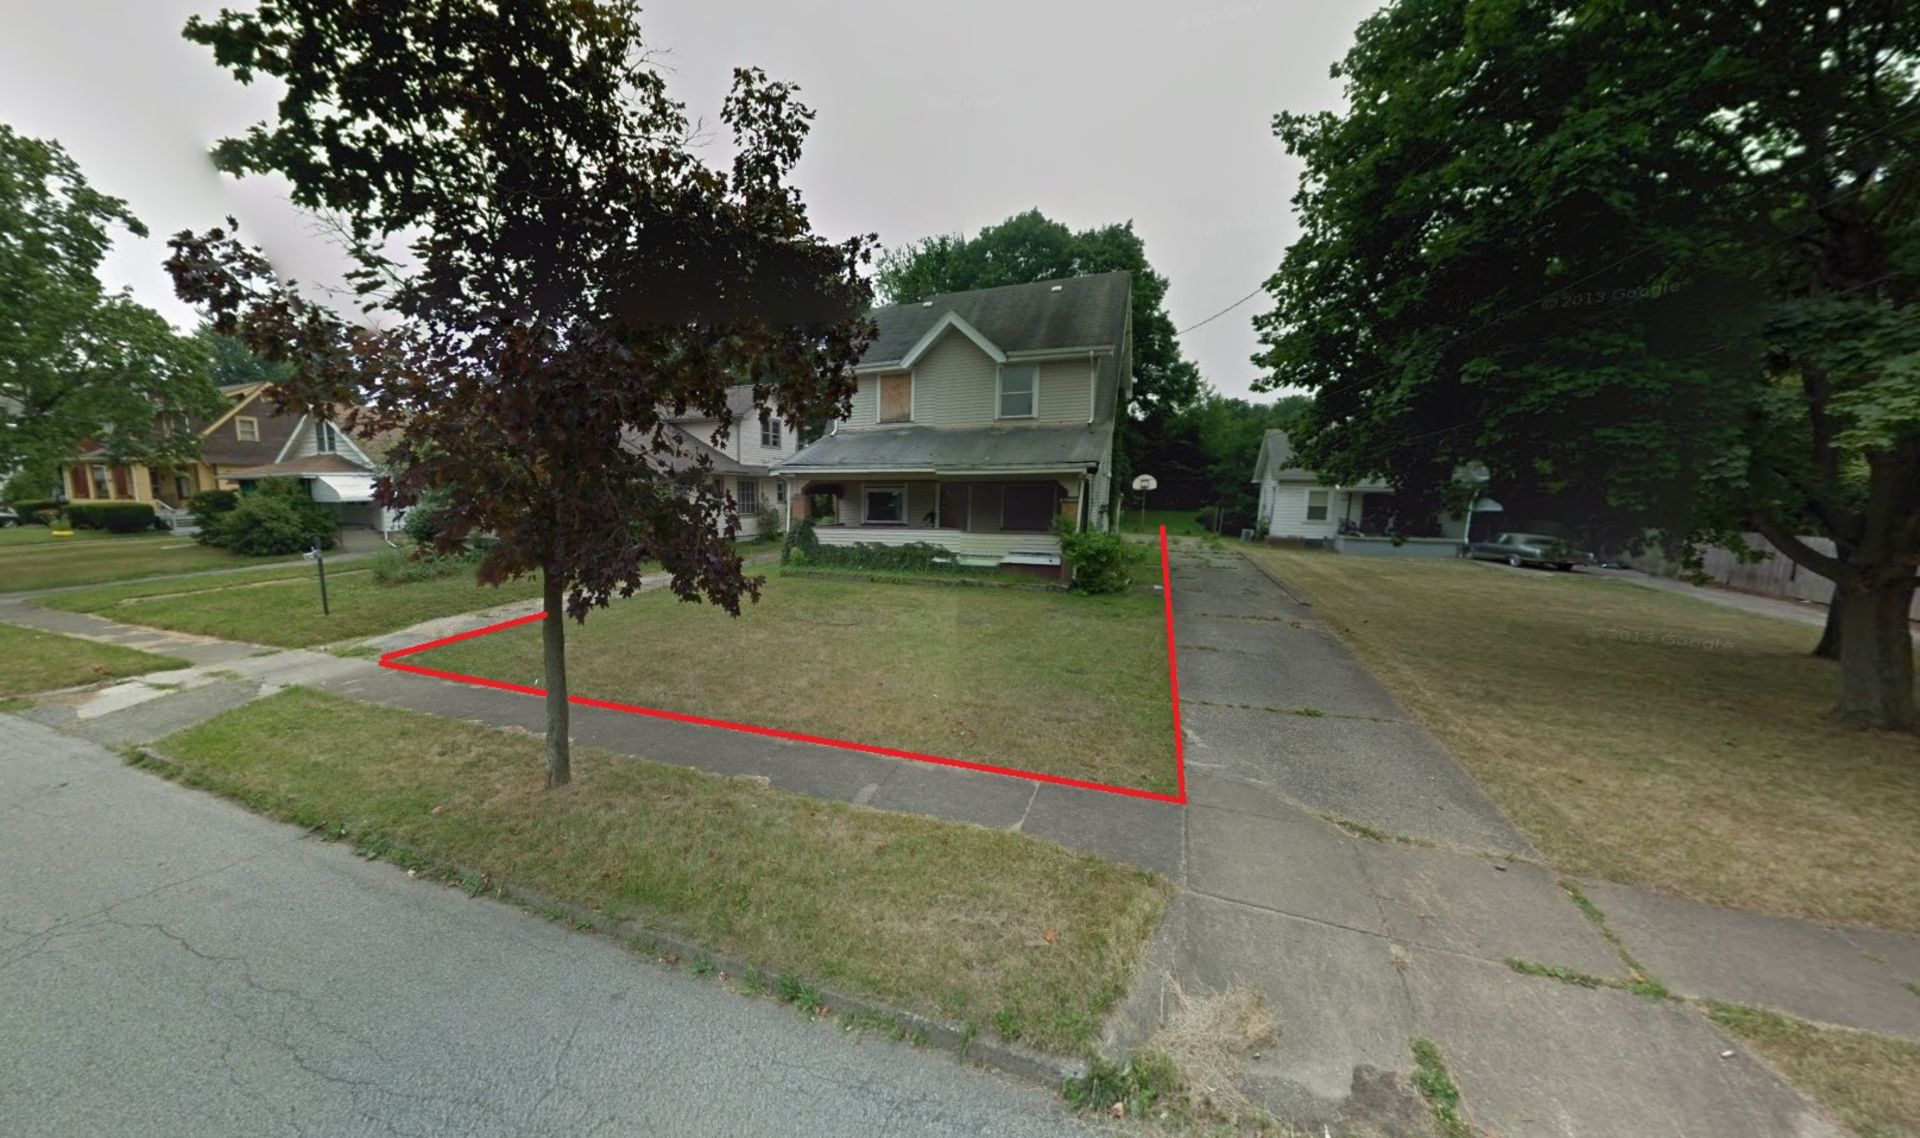 PLOT OF LAND AT 1921 S HEIGHTS AVENUE, YOUNGSTOWN, OHIO - Image 5 of 7